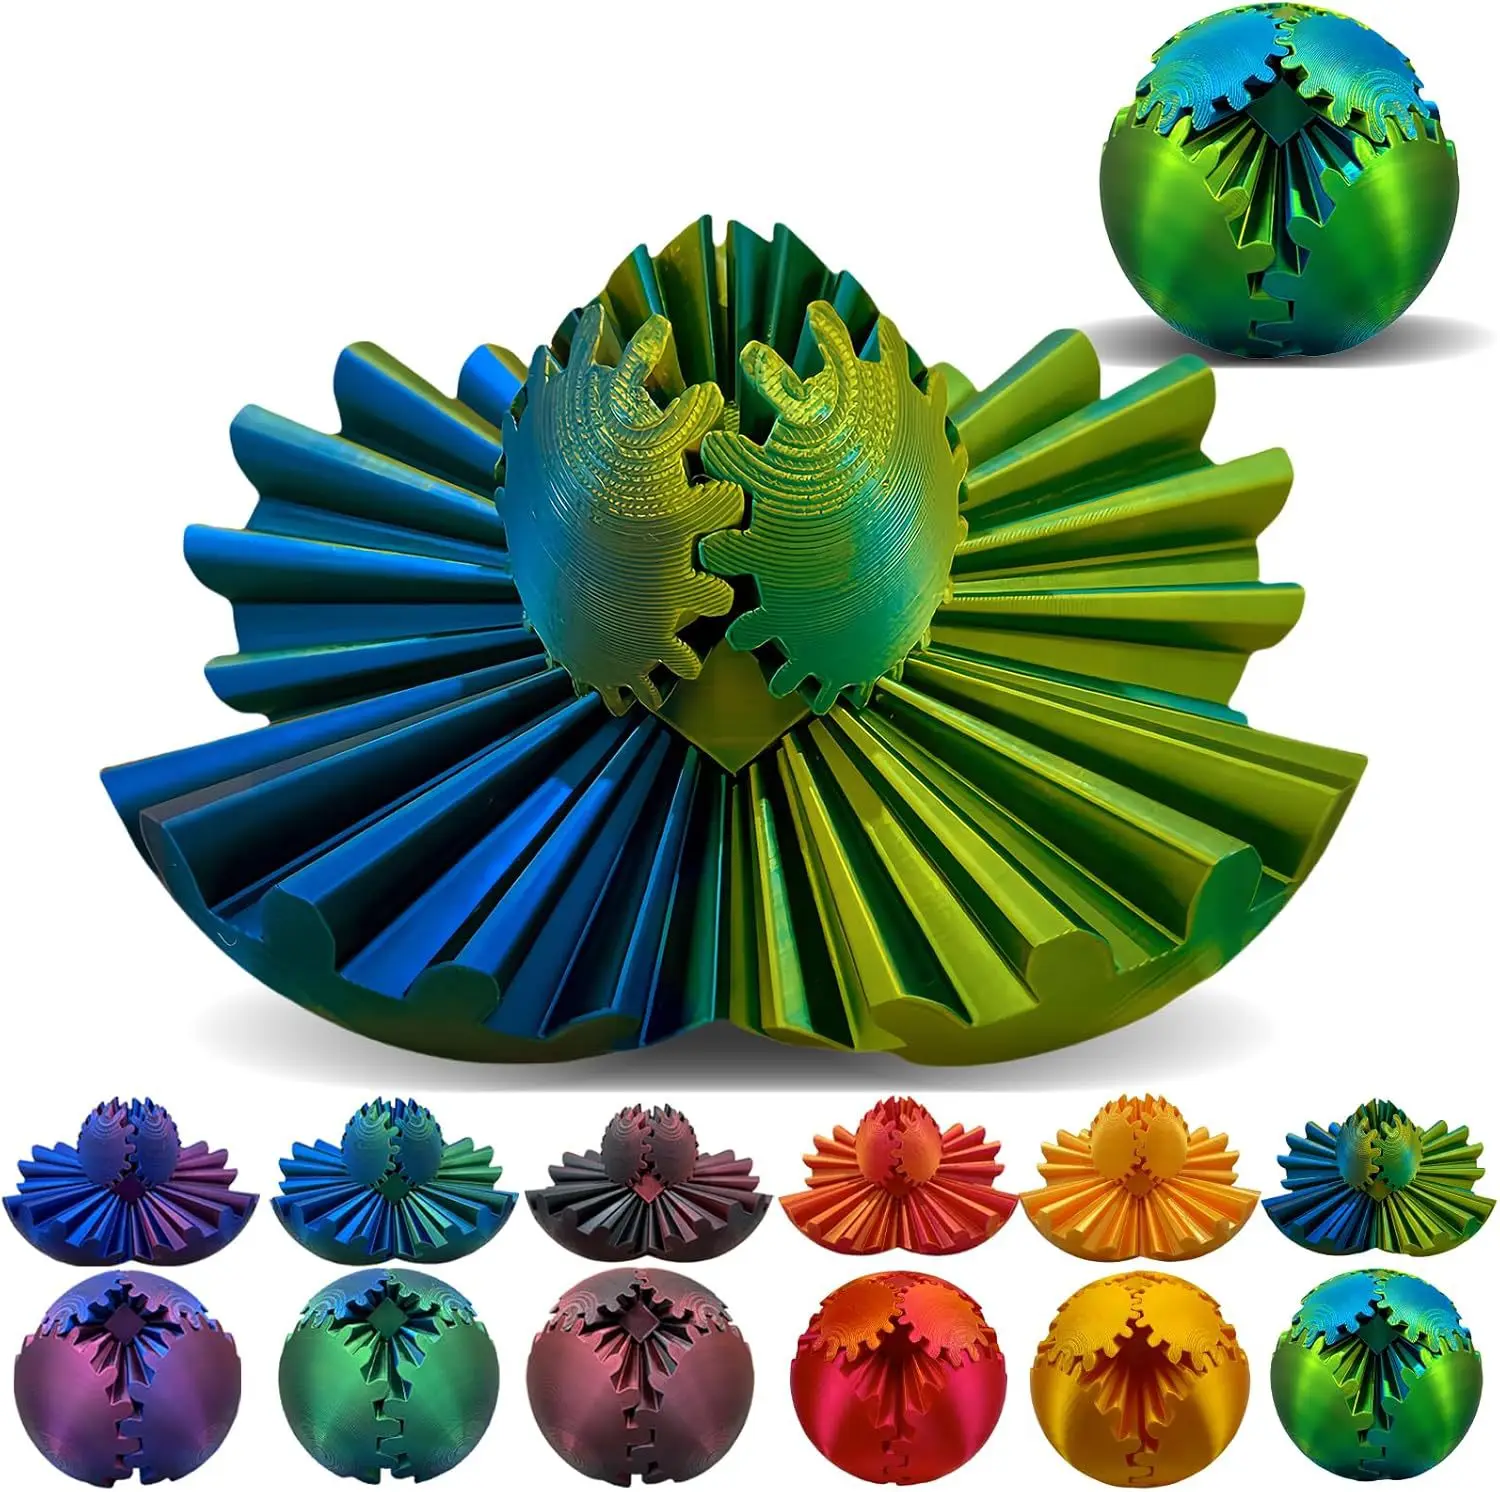 

3D Printed Rotating Gear Ball Adjustable Direction Toy Rotating Ball High Quality Room Desktop Innovative Decorative Model